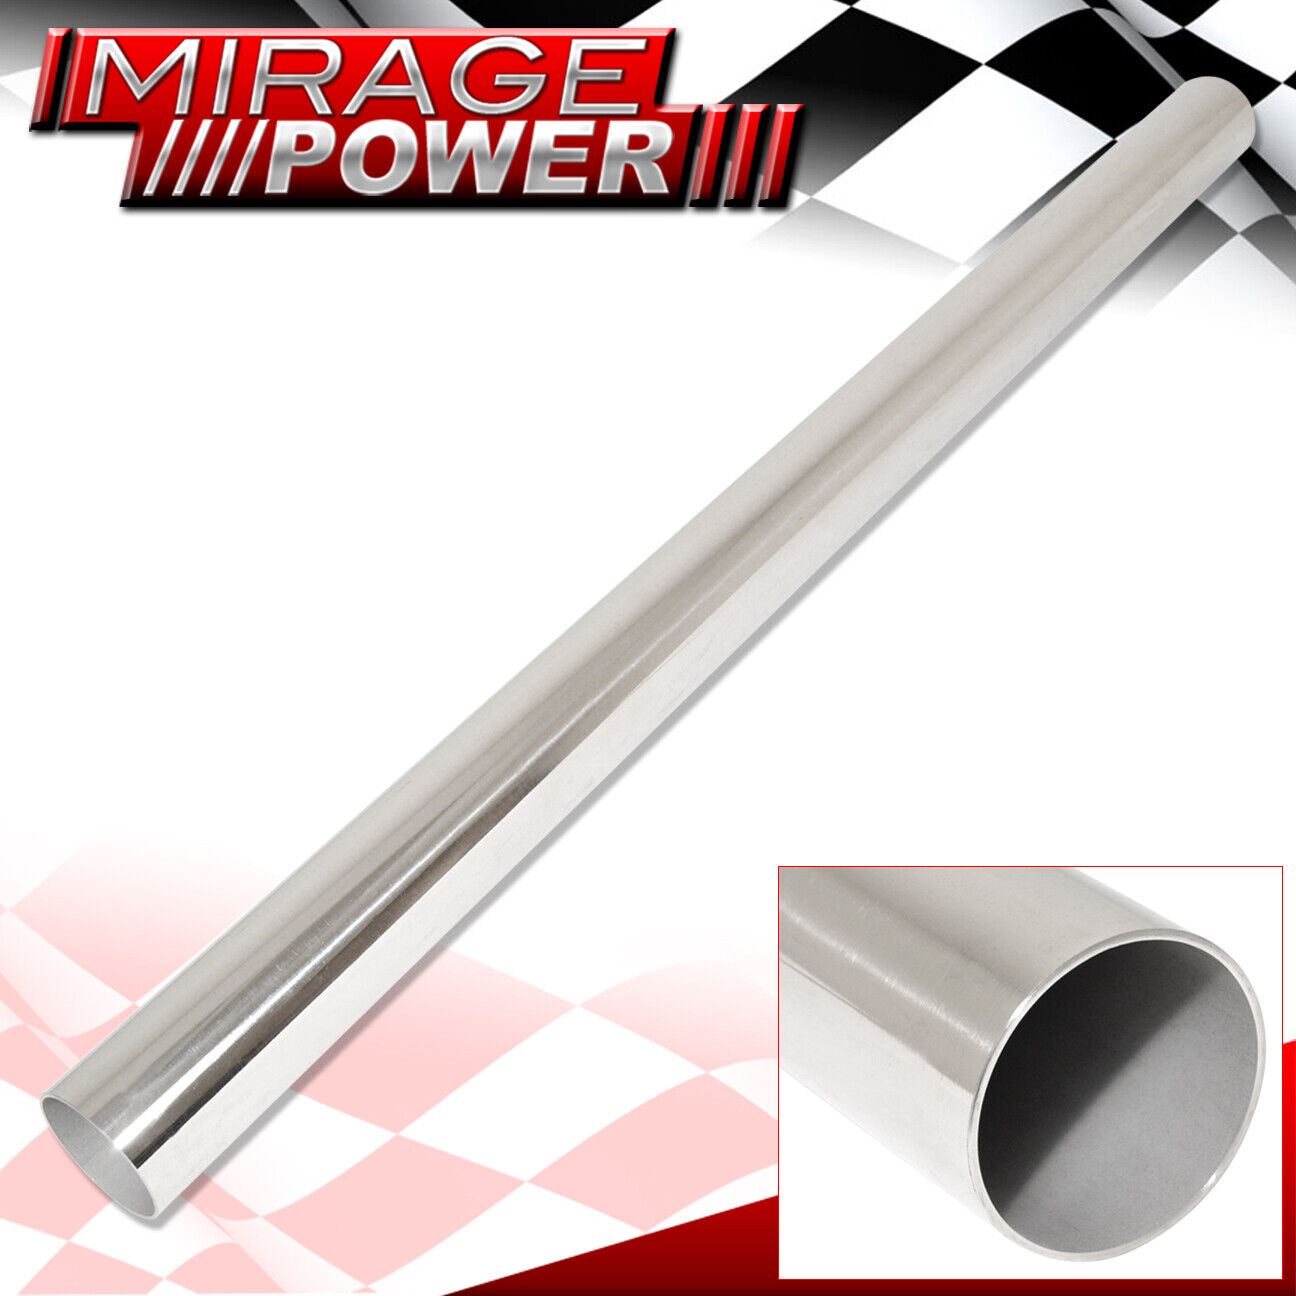 T304 Stainless Steel 14Gauge Downpipe Exhaust 3.5Inch Od 4Ft Long For Mitsubishi